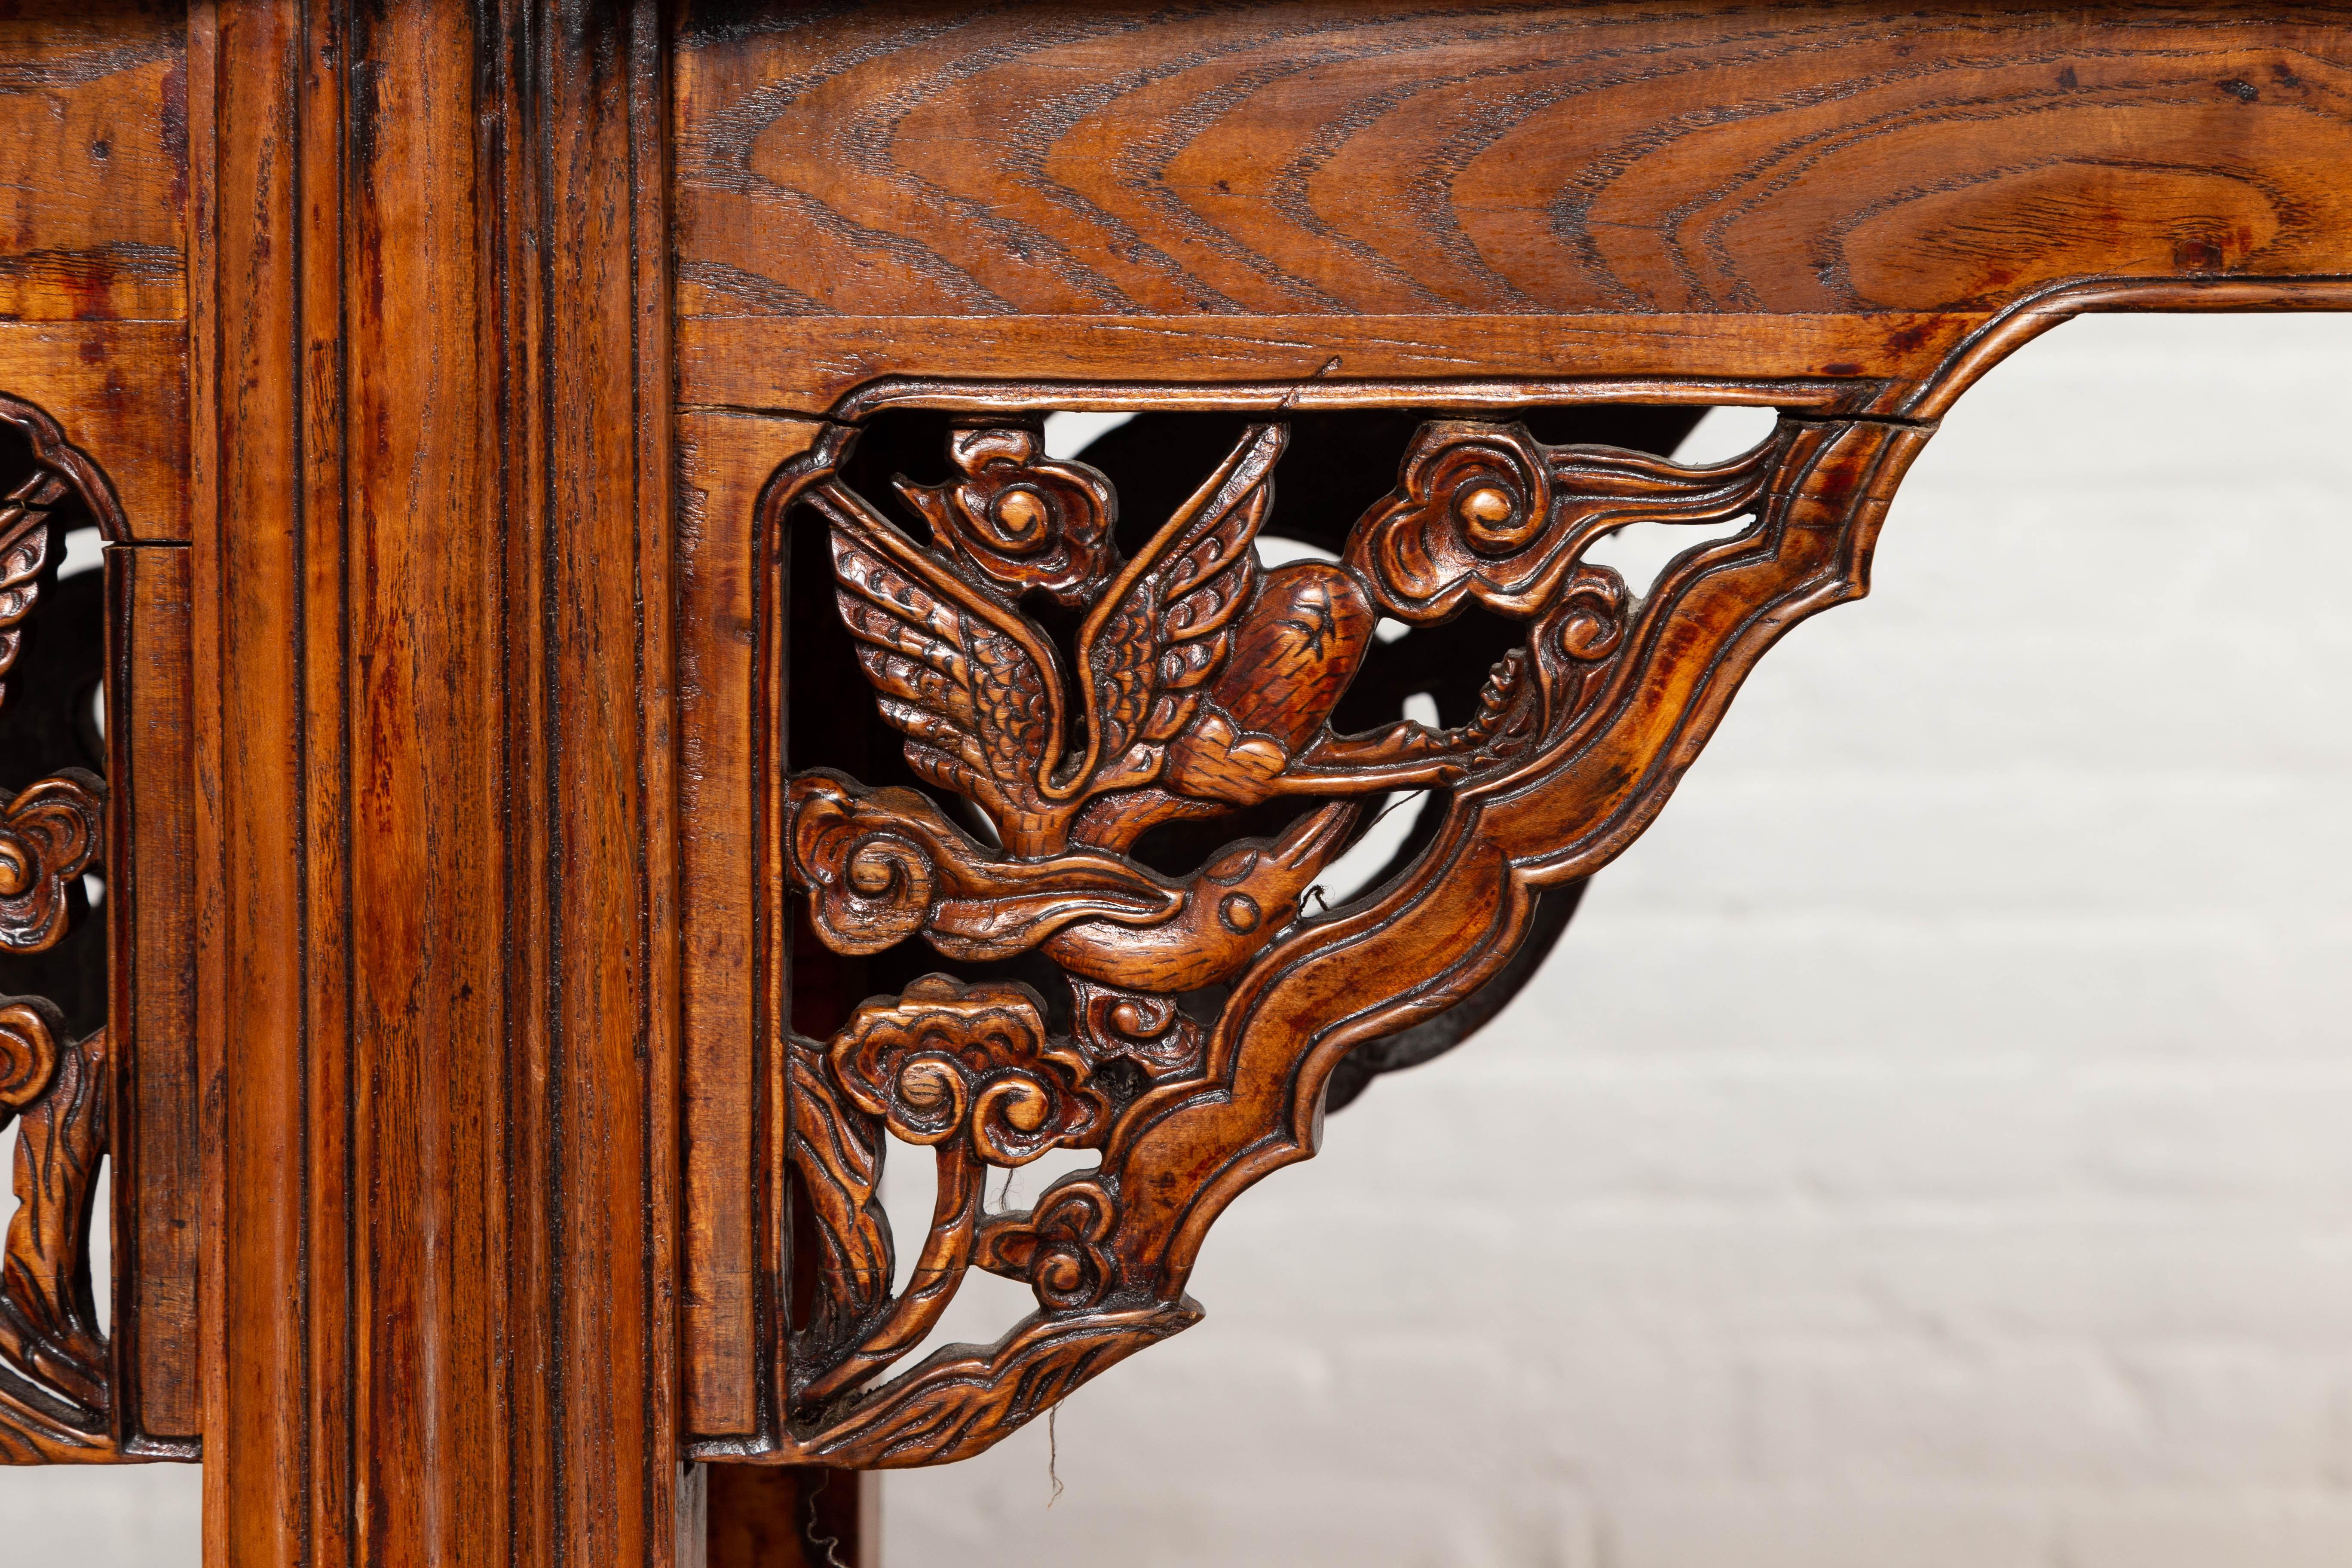 19th Century Chinese Ming Style Altar Console Table with Bird-Carved Spandrels and Fretwork